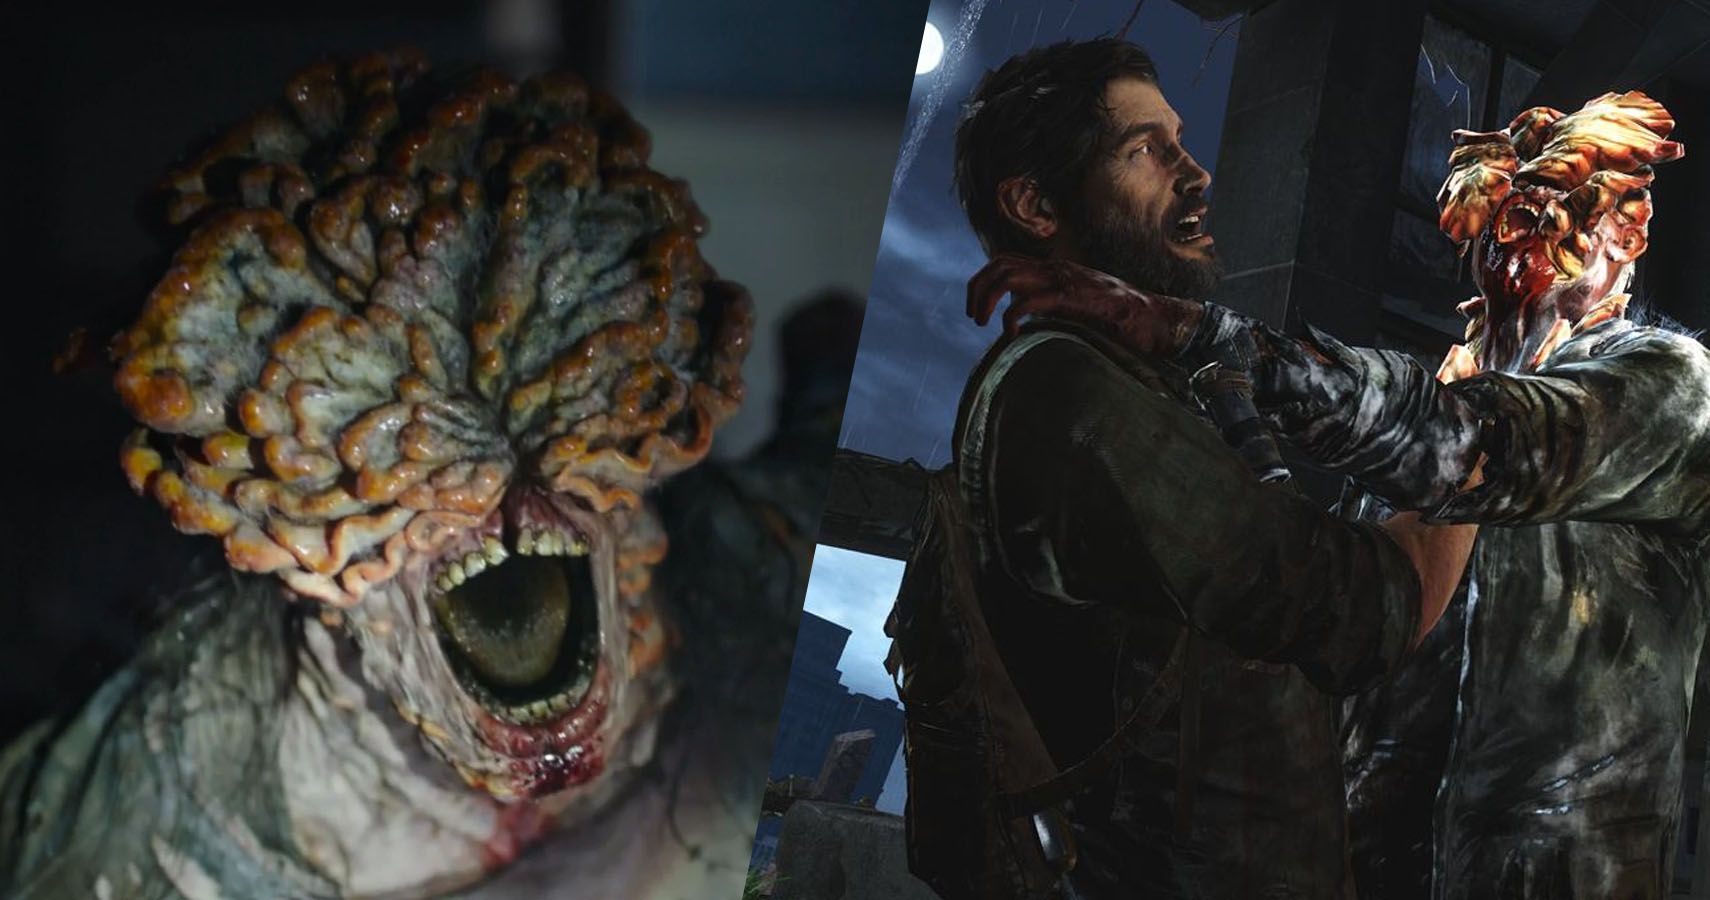 How to Kill Clickers in The Last of Us